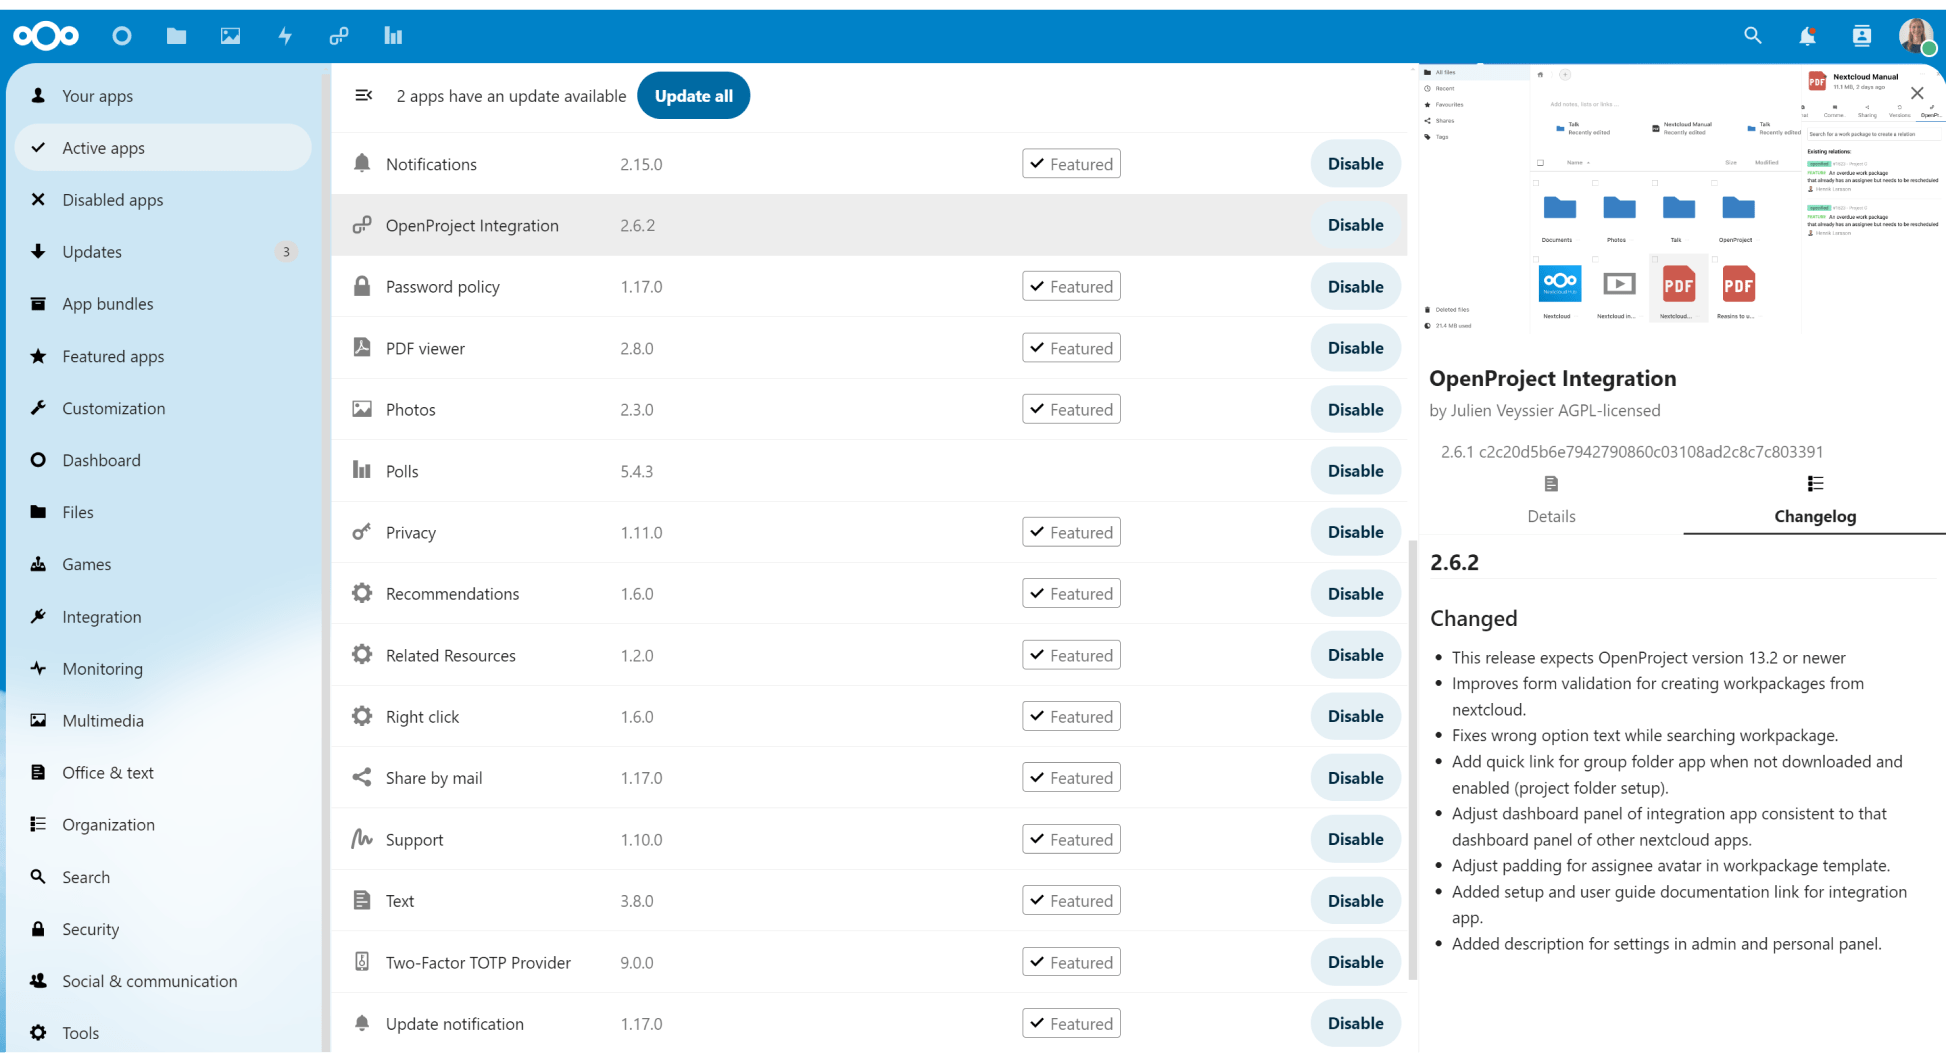 OpenProject integration app for Nextcloud released in version 2.6.2